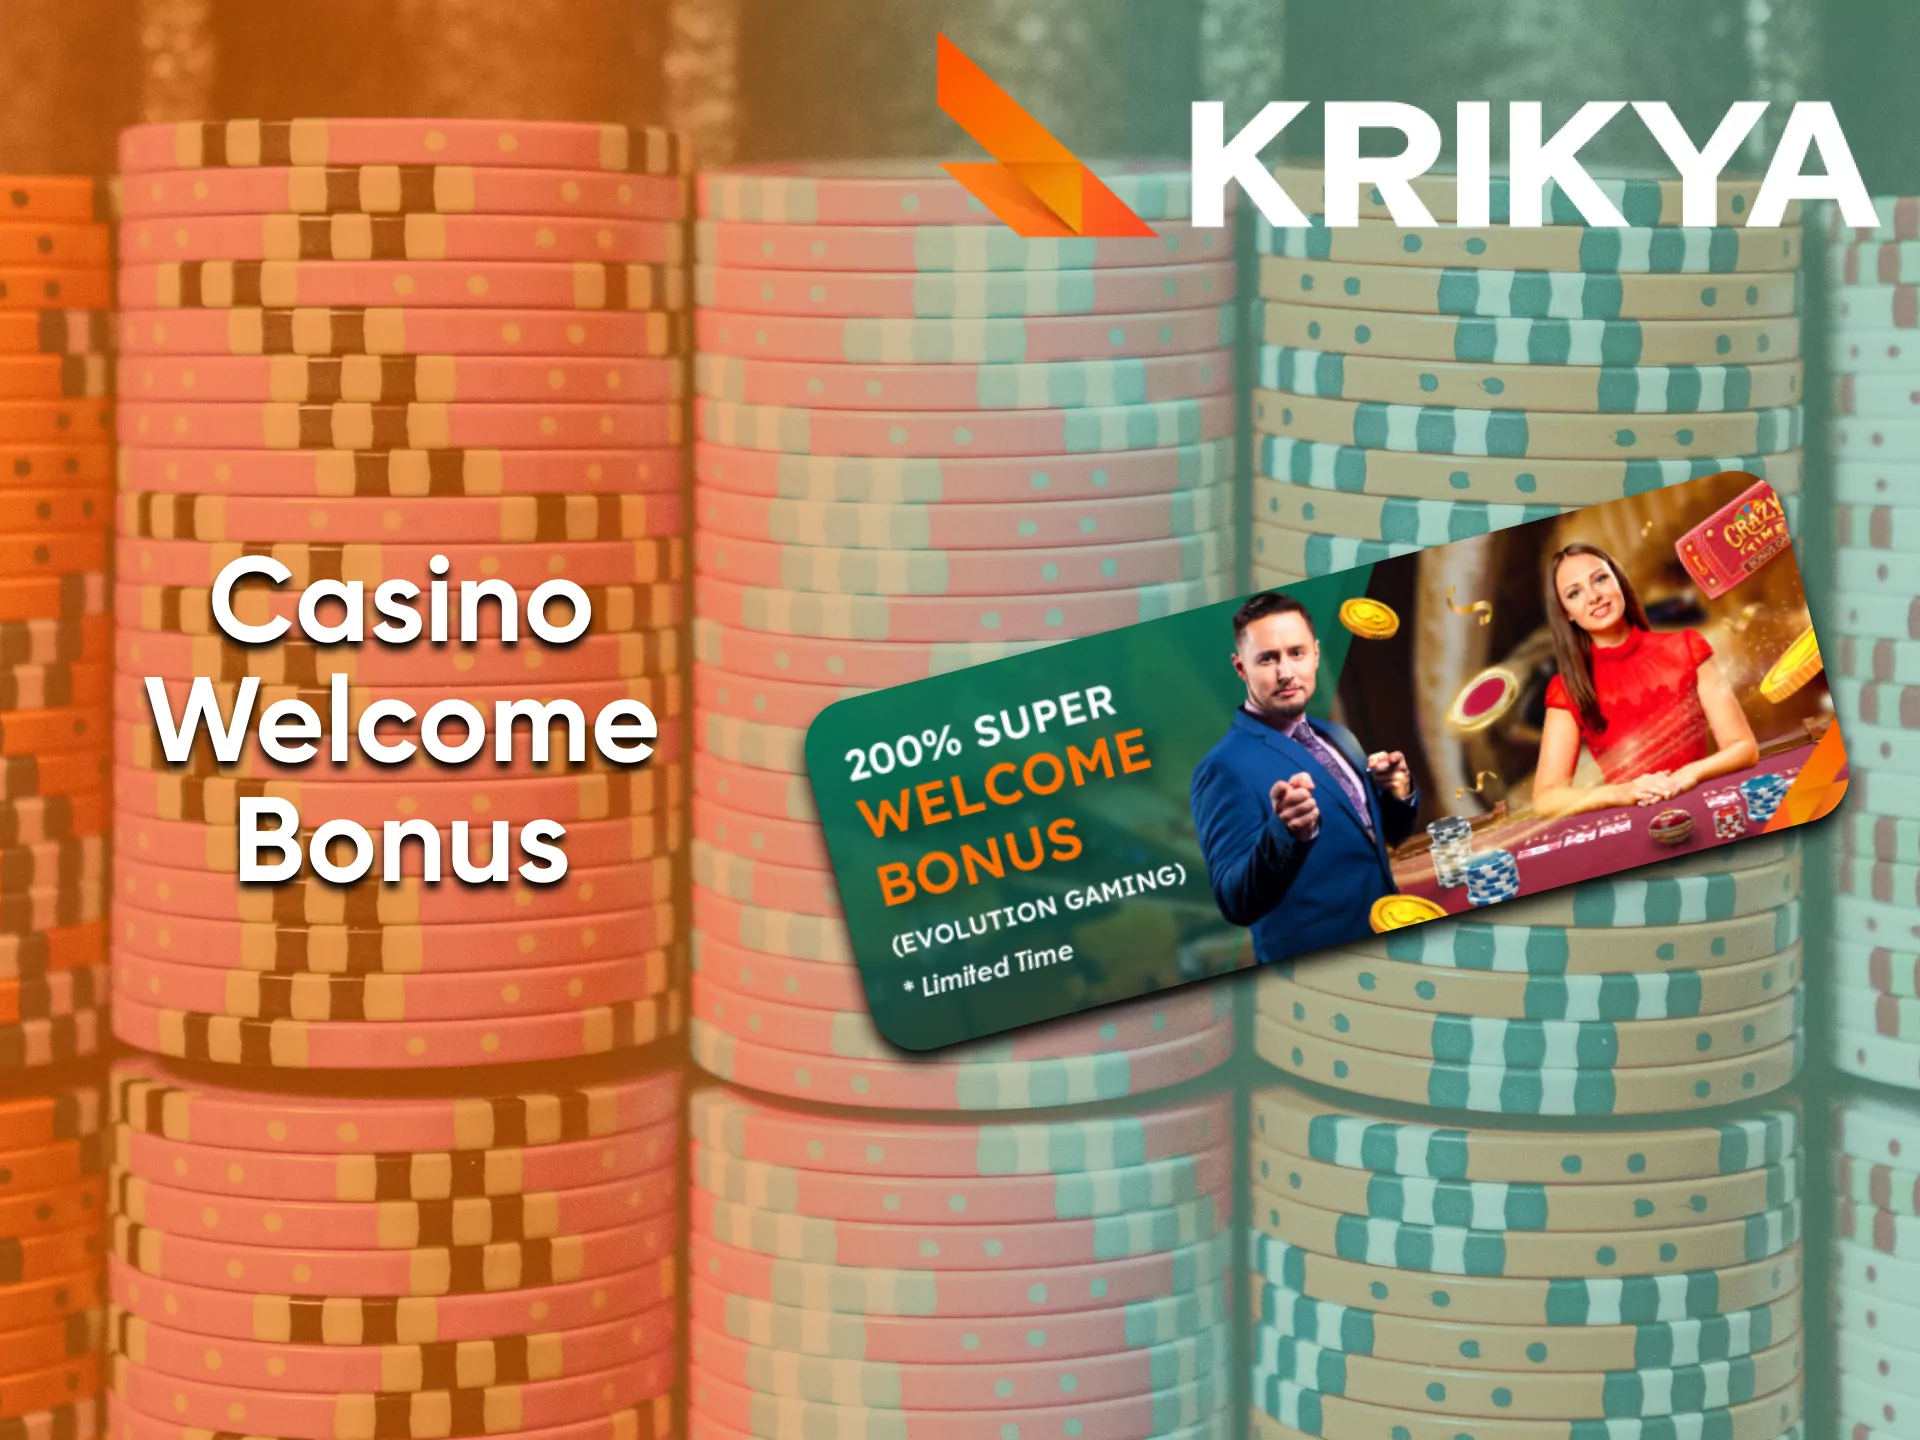 By making a deposit to play at Krikya casino you will receive a bonus.